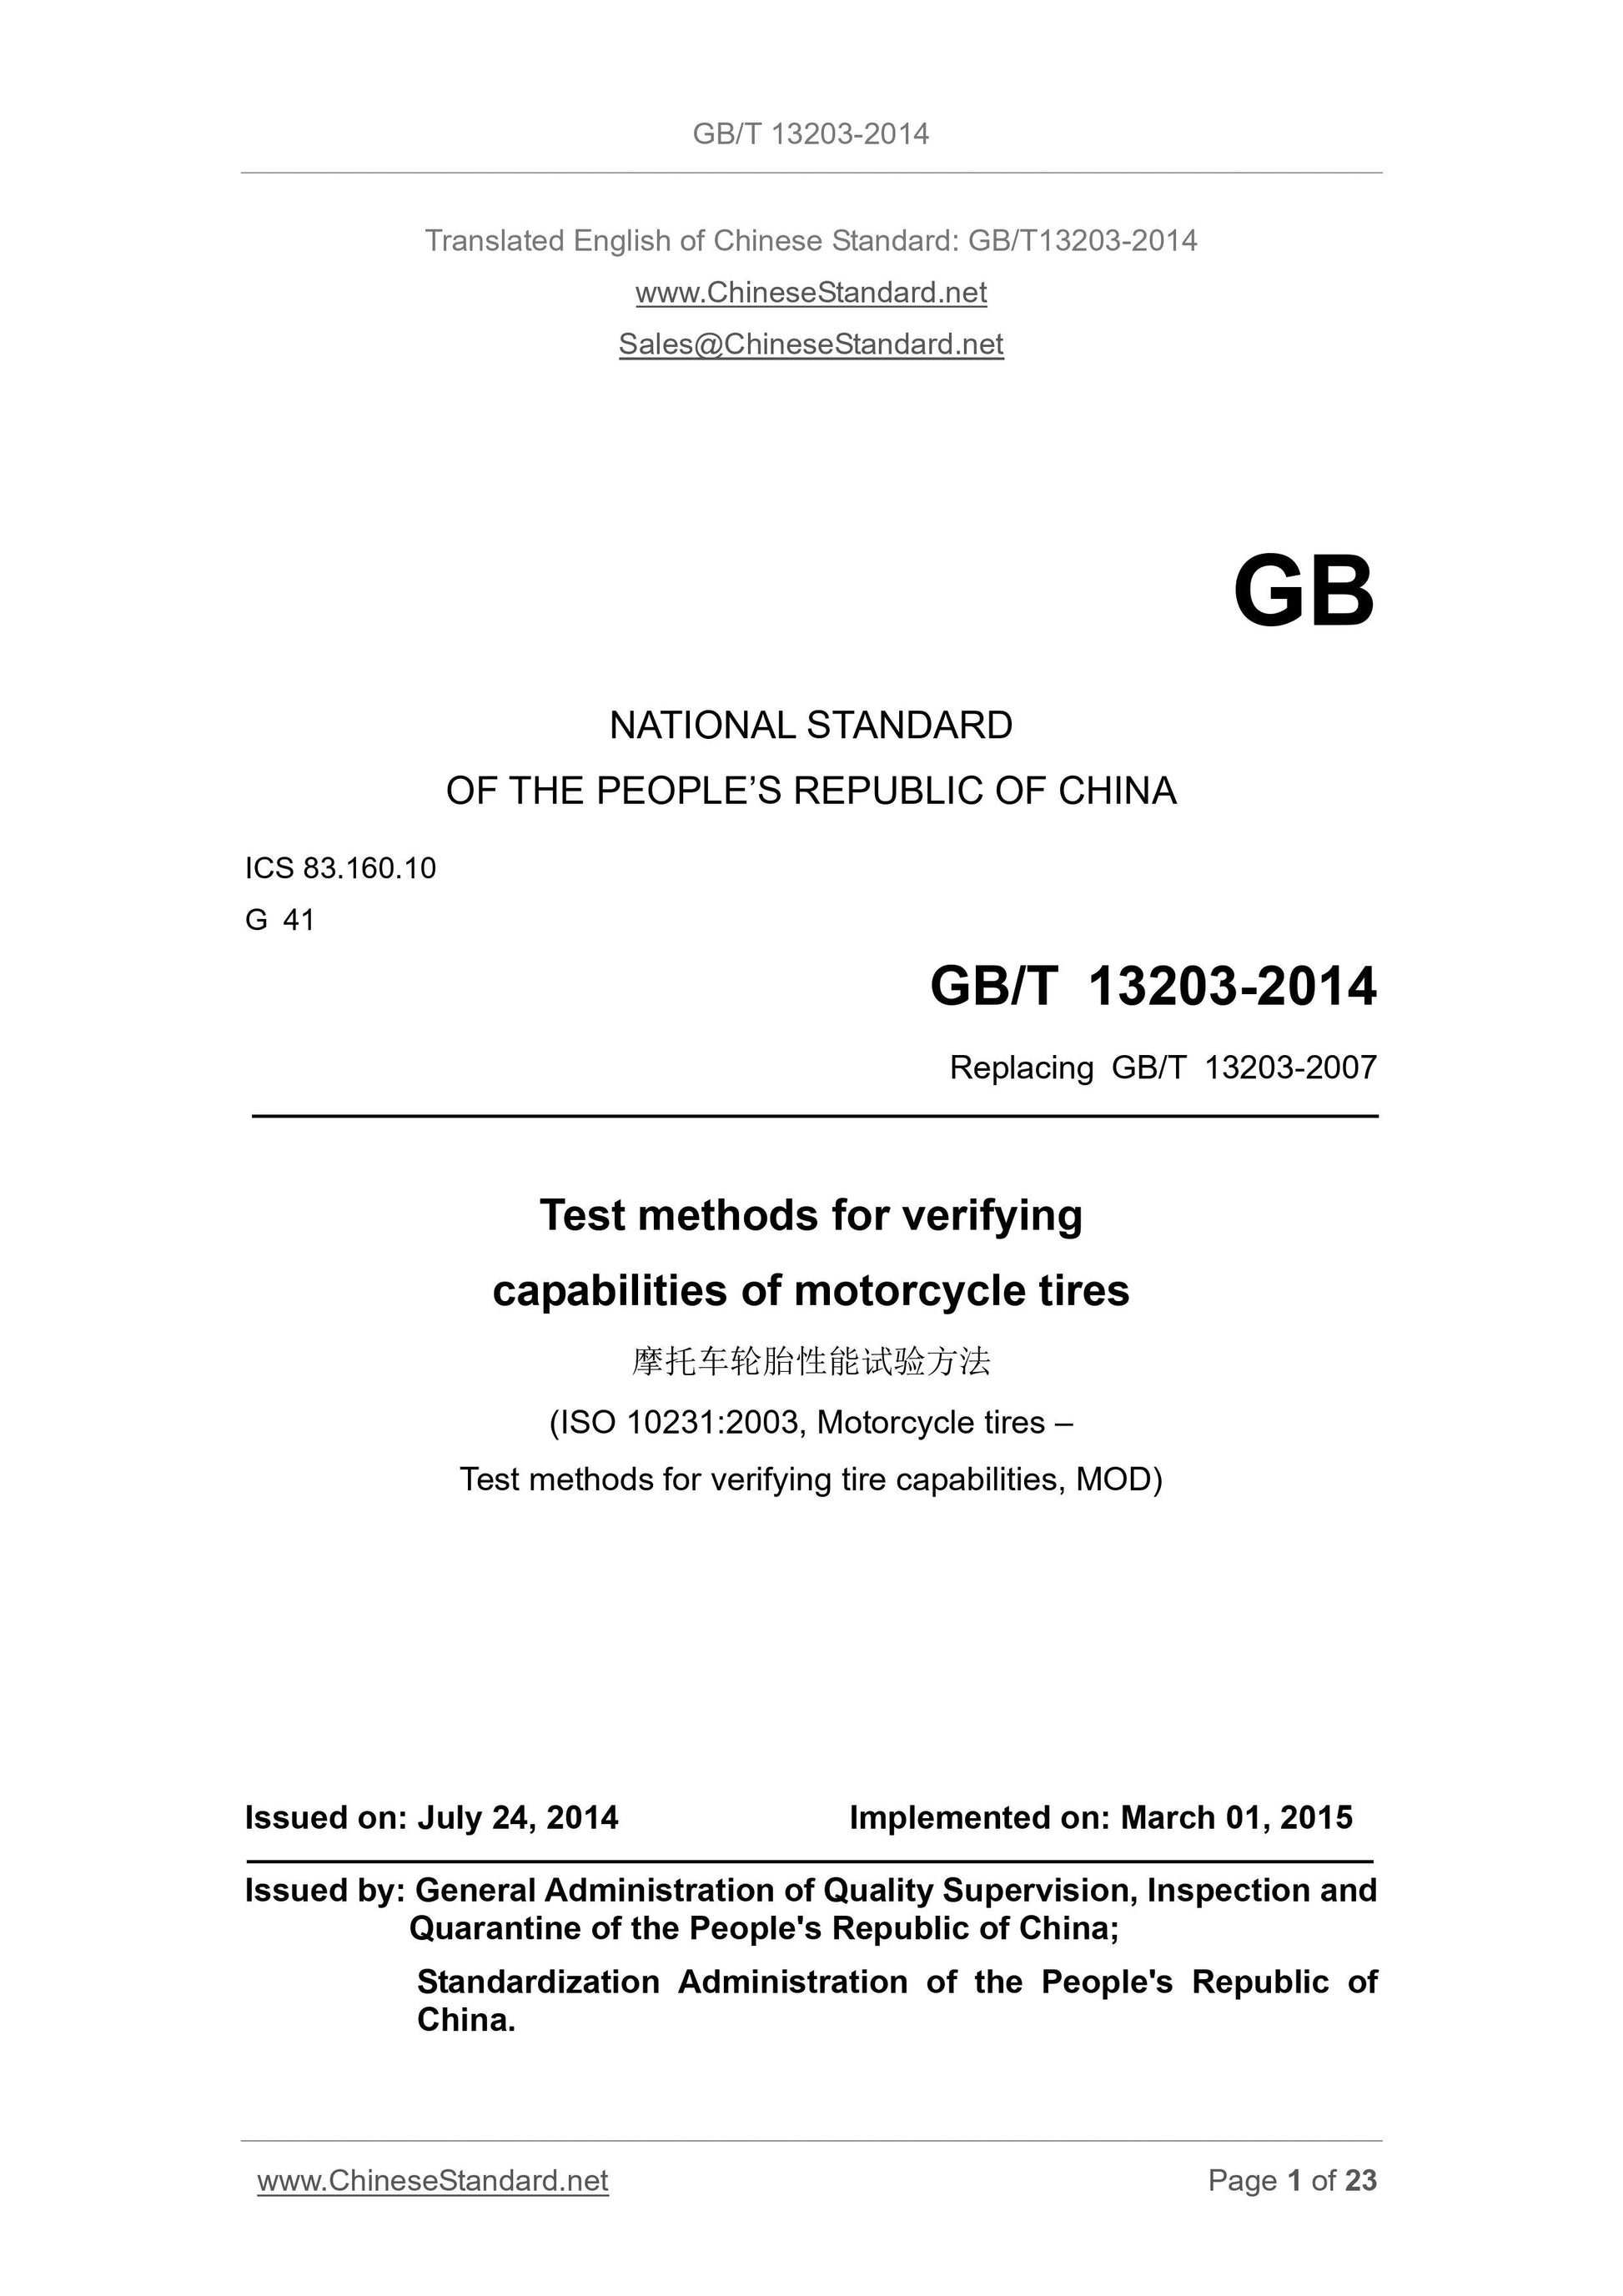 GB/T 13203-2014 Page 1